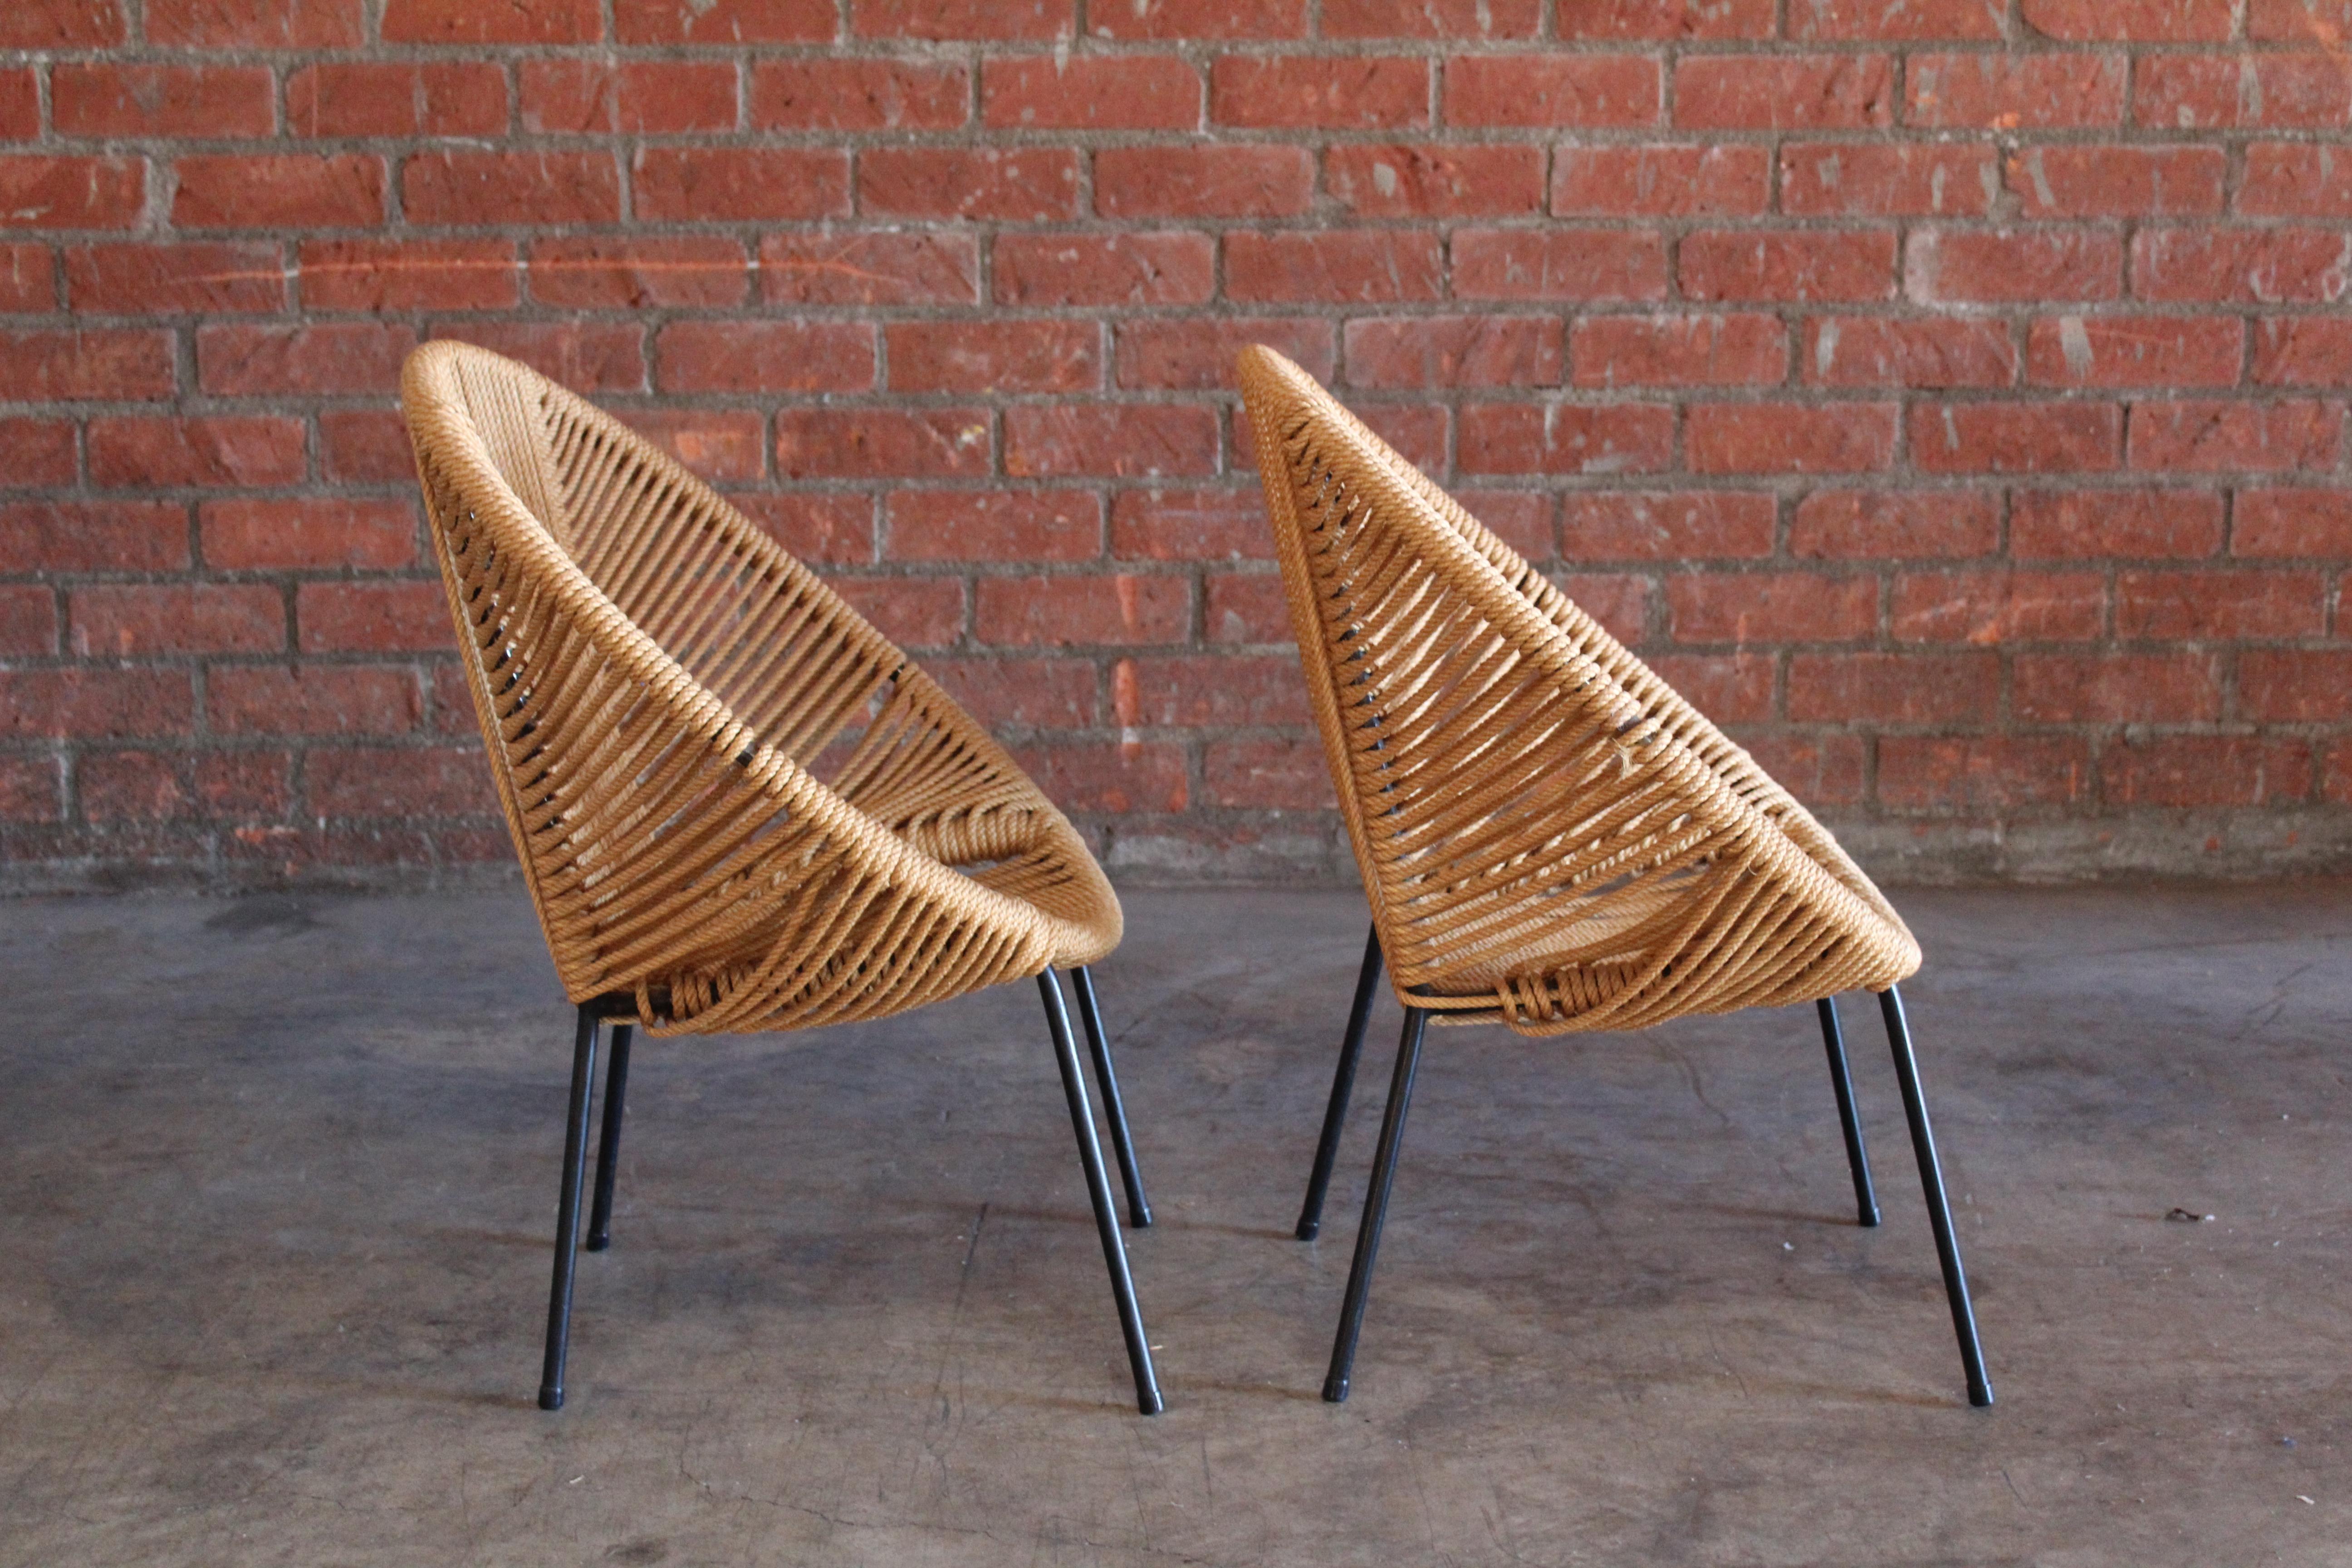 Pair of 1950s Children's Iron and Rope Chairs, France 1